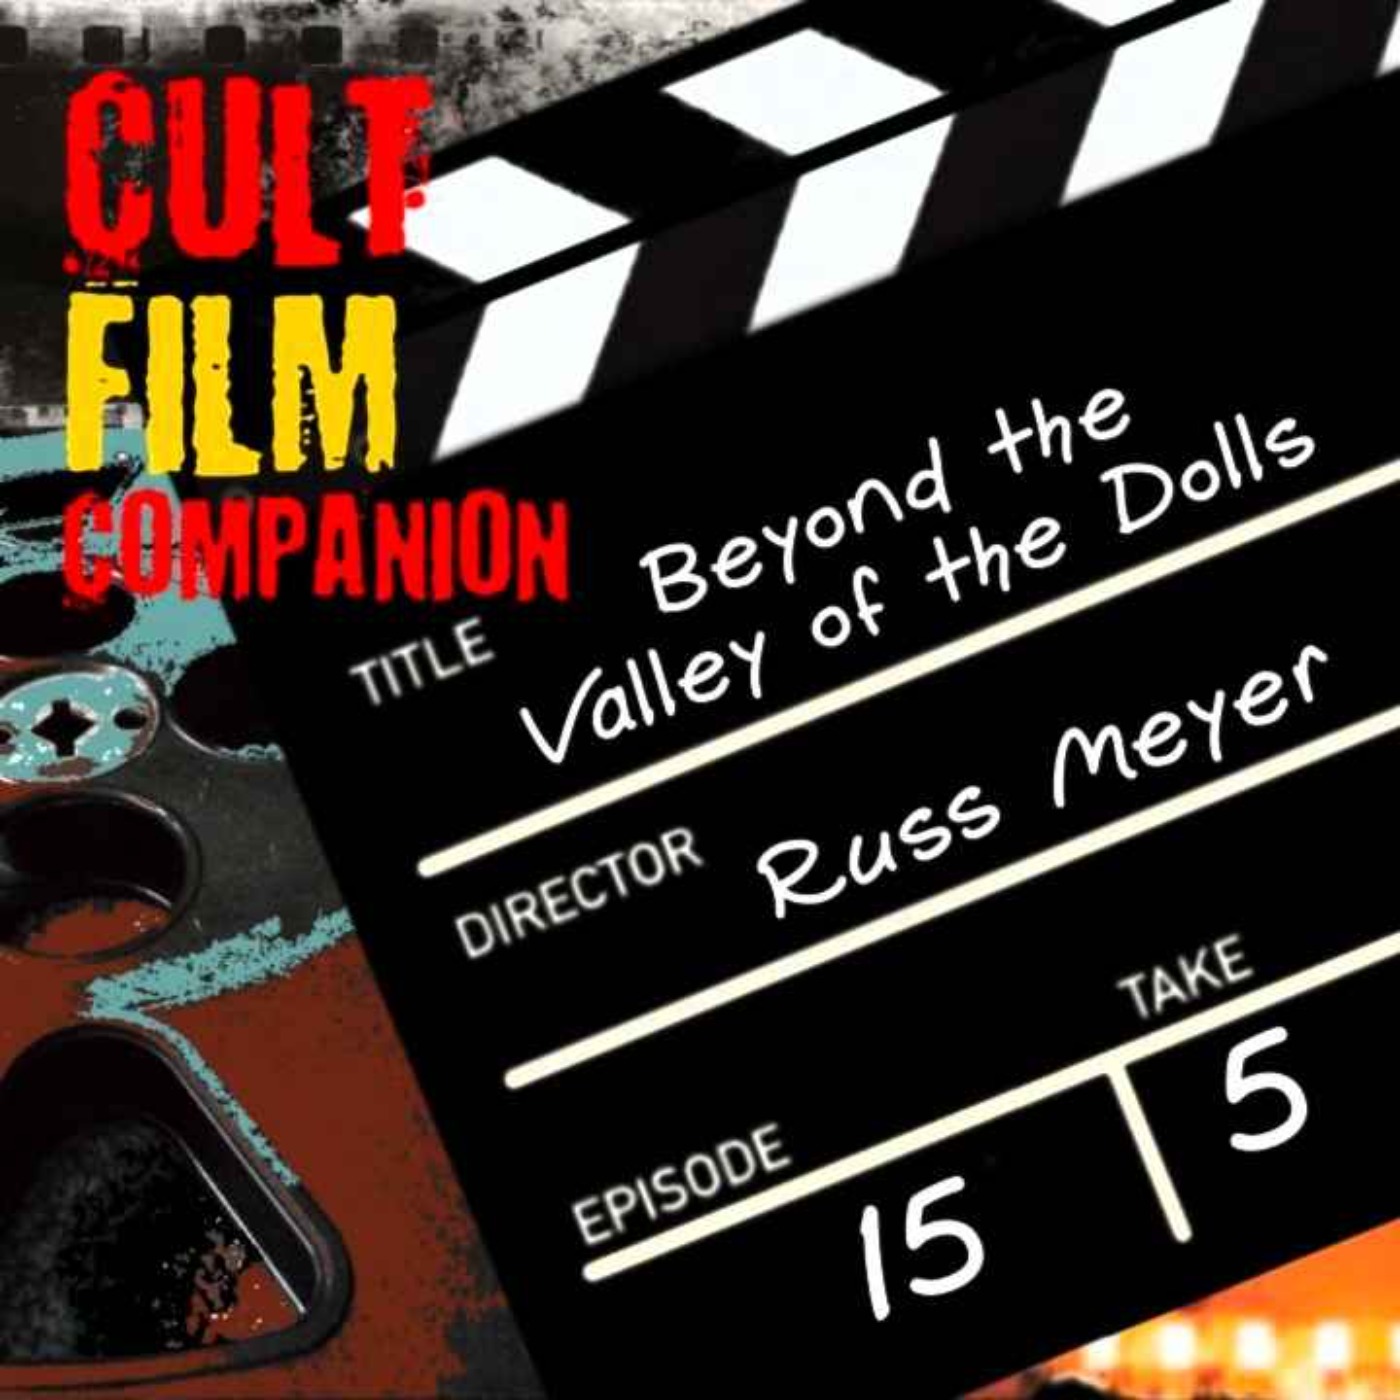 Ep. 15 Beyond the Valley of the Dolls directed by Russ Meyer